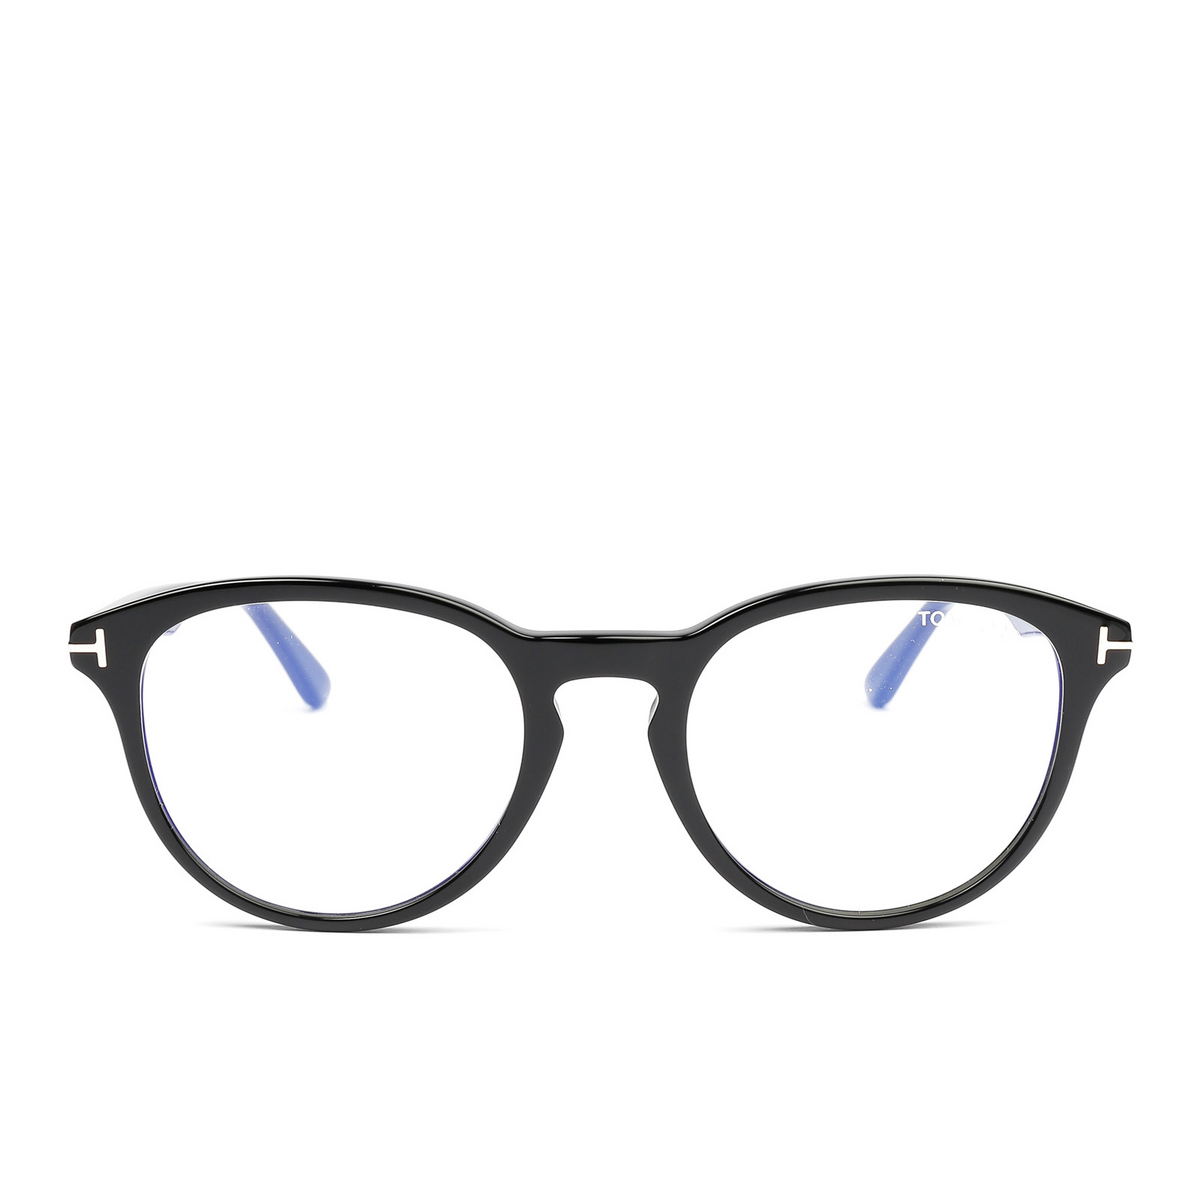 Tom Ford® Round Eyeglasses: FT5556-B color 001 - front view.